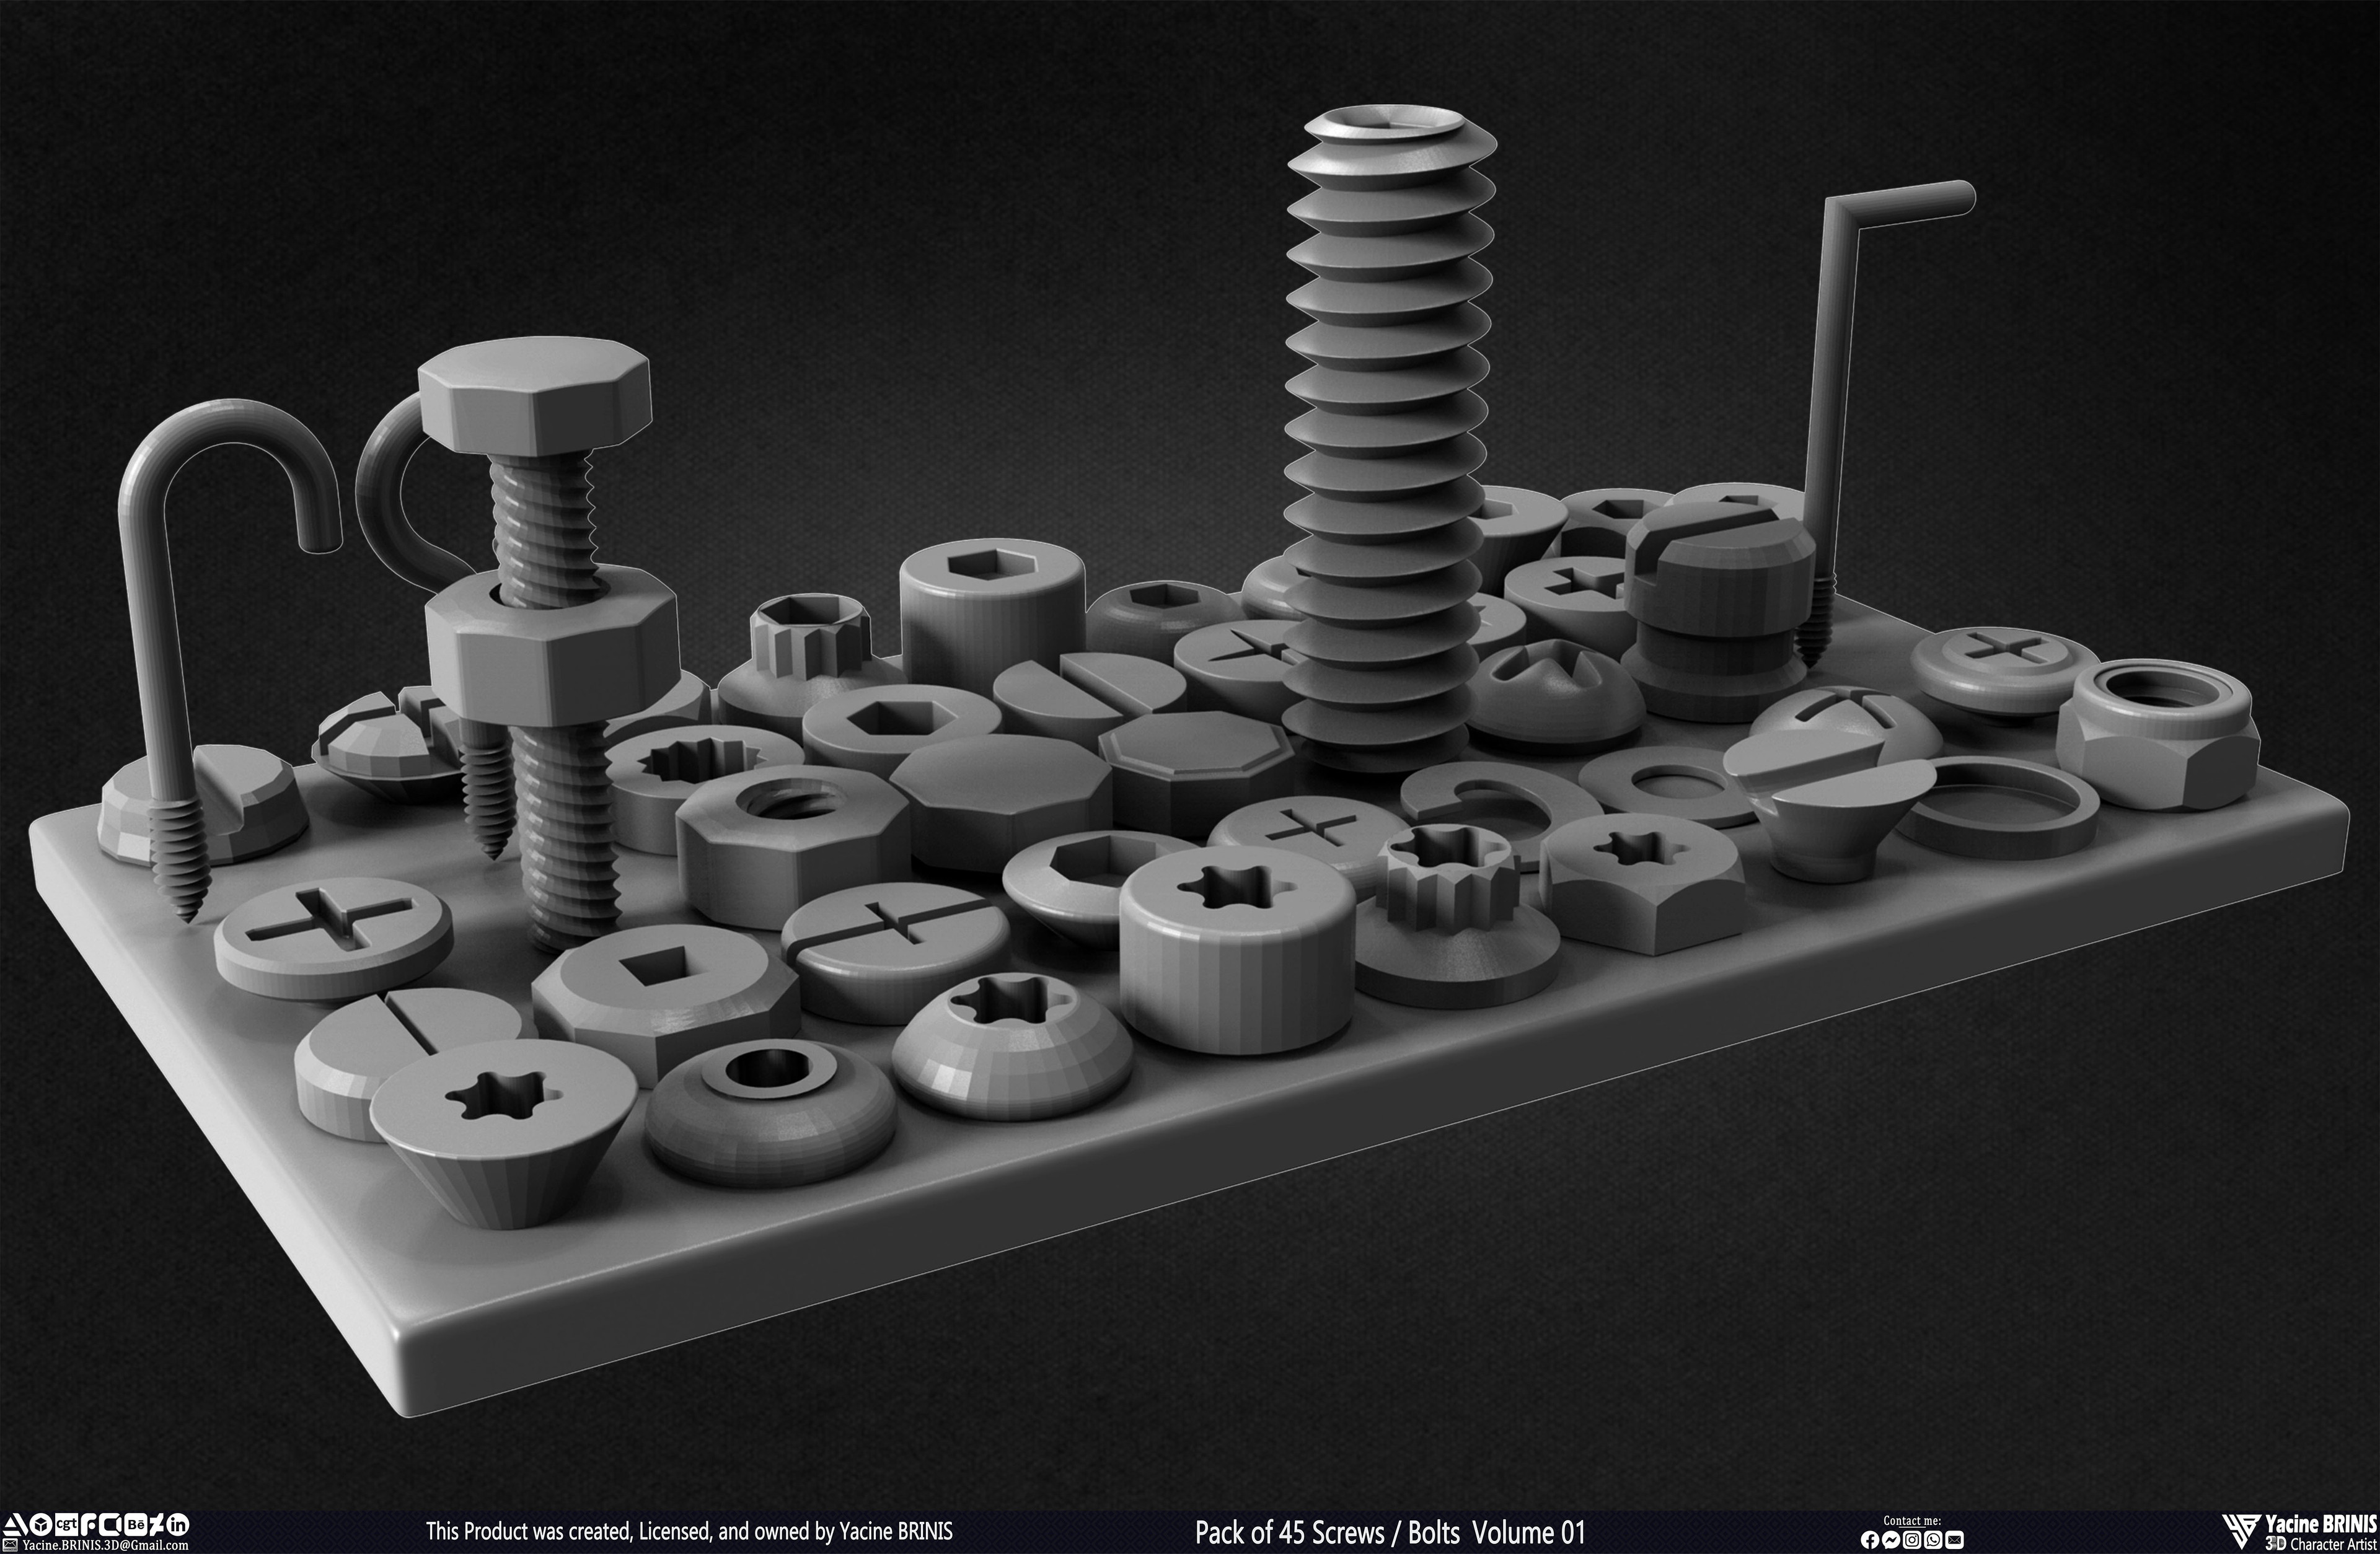 Pack of 45 Screws-Bolts Volume 01 Sculpted By Yacine BRINIS Set 008